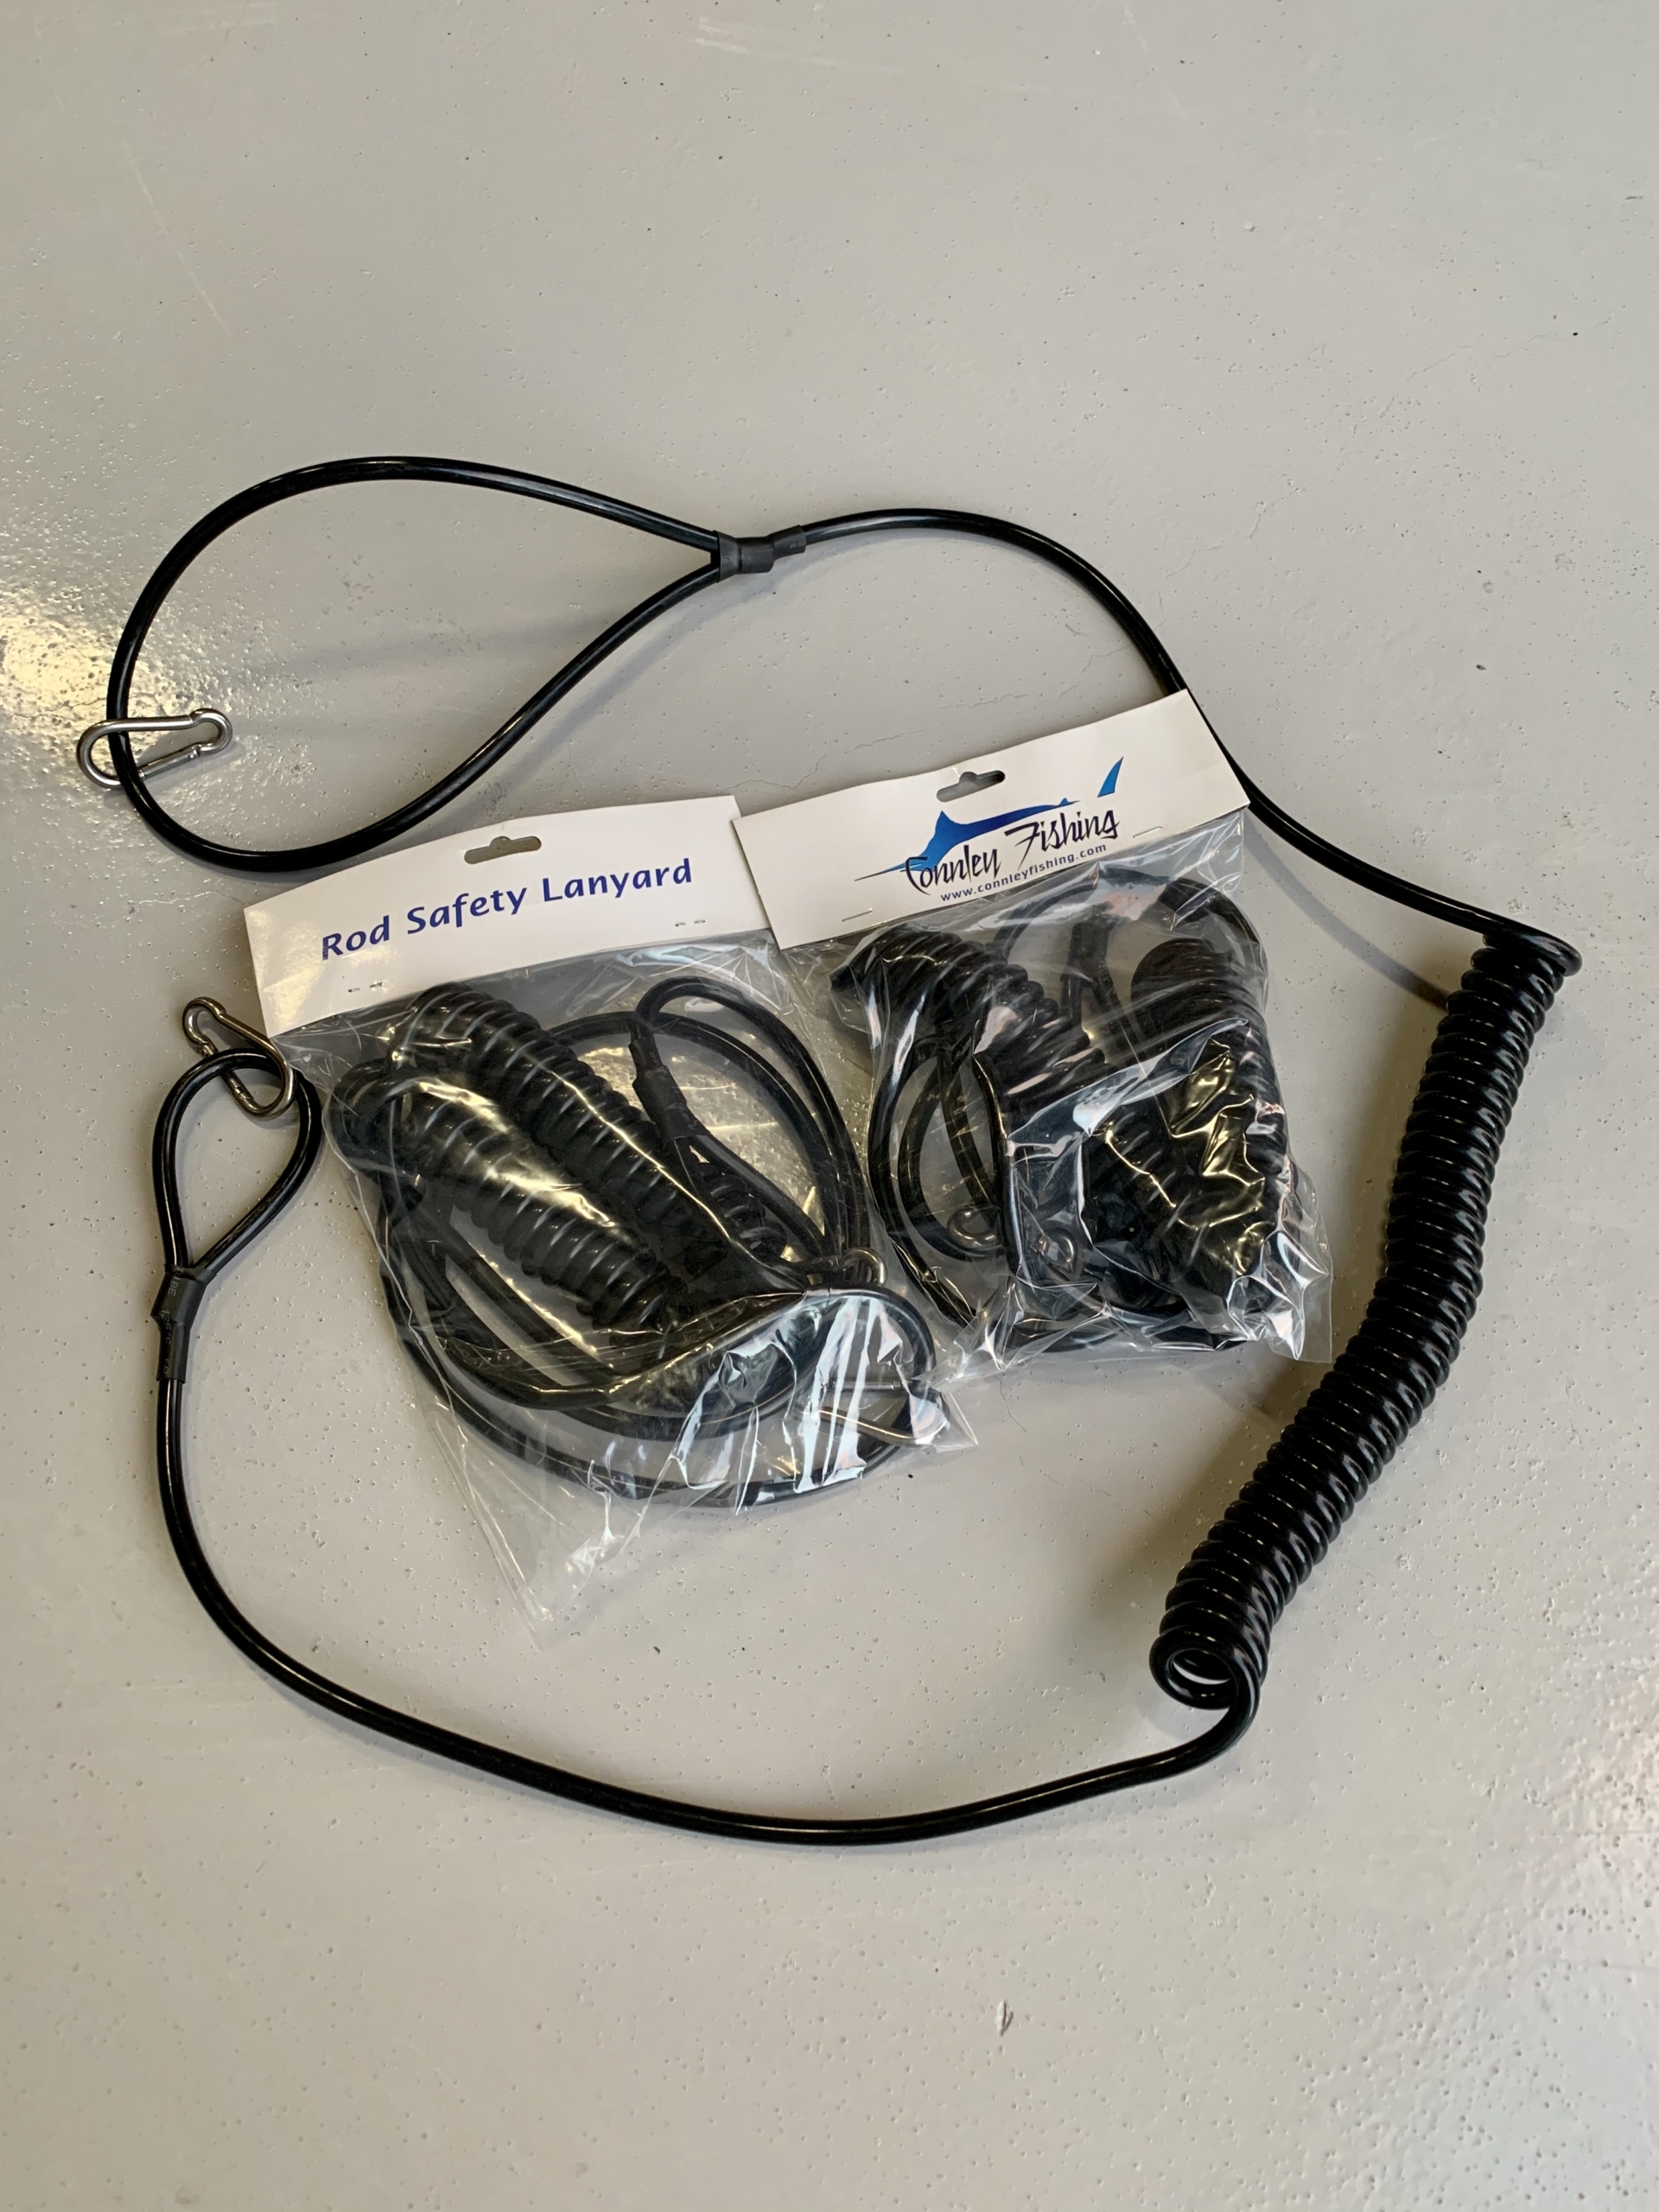 Heavy Duty Rod Coil – Safety Lanyard – Connley Fishing